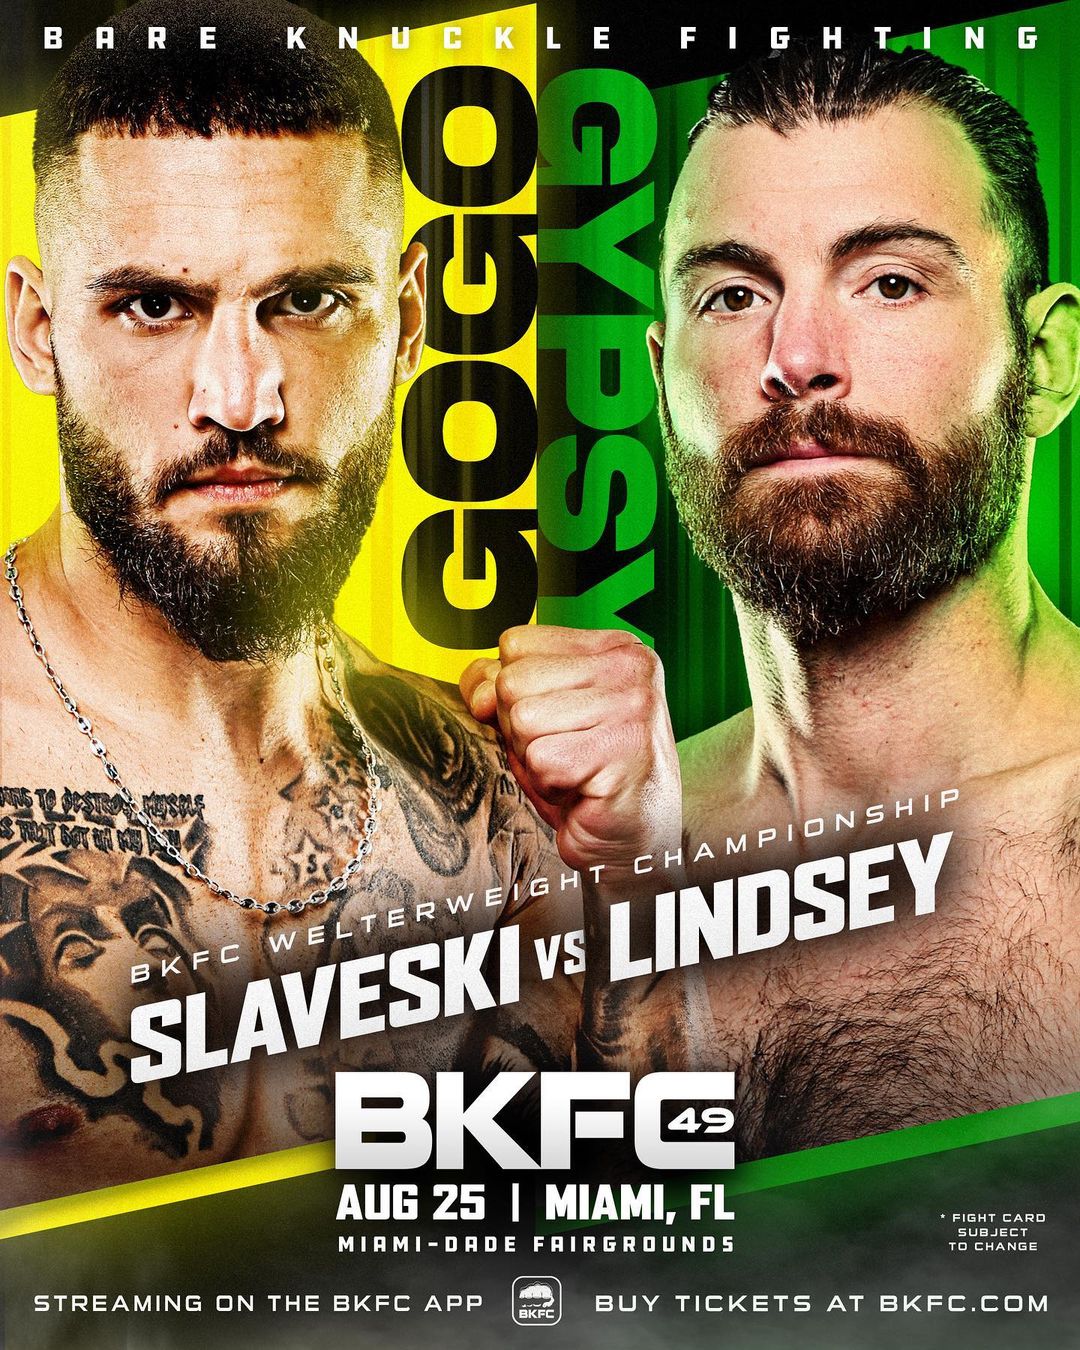 Bare Knuckle FC 49